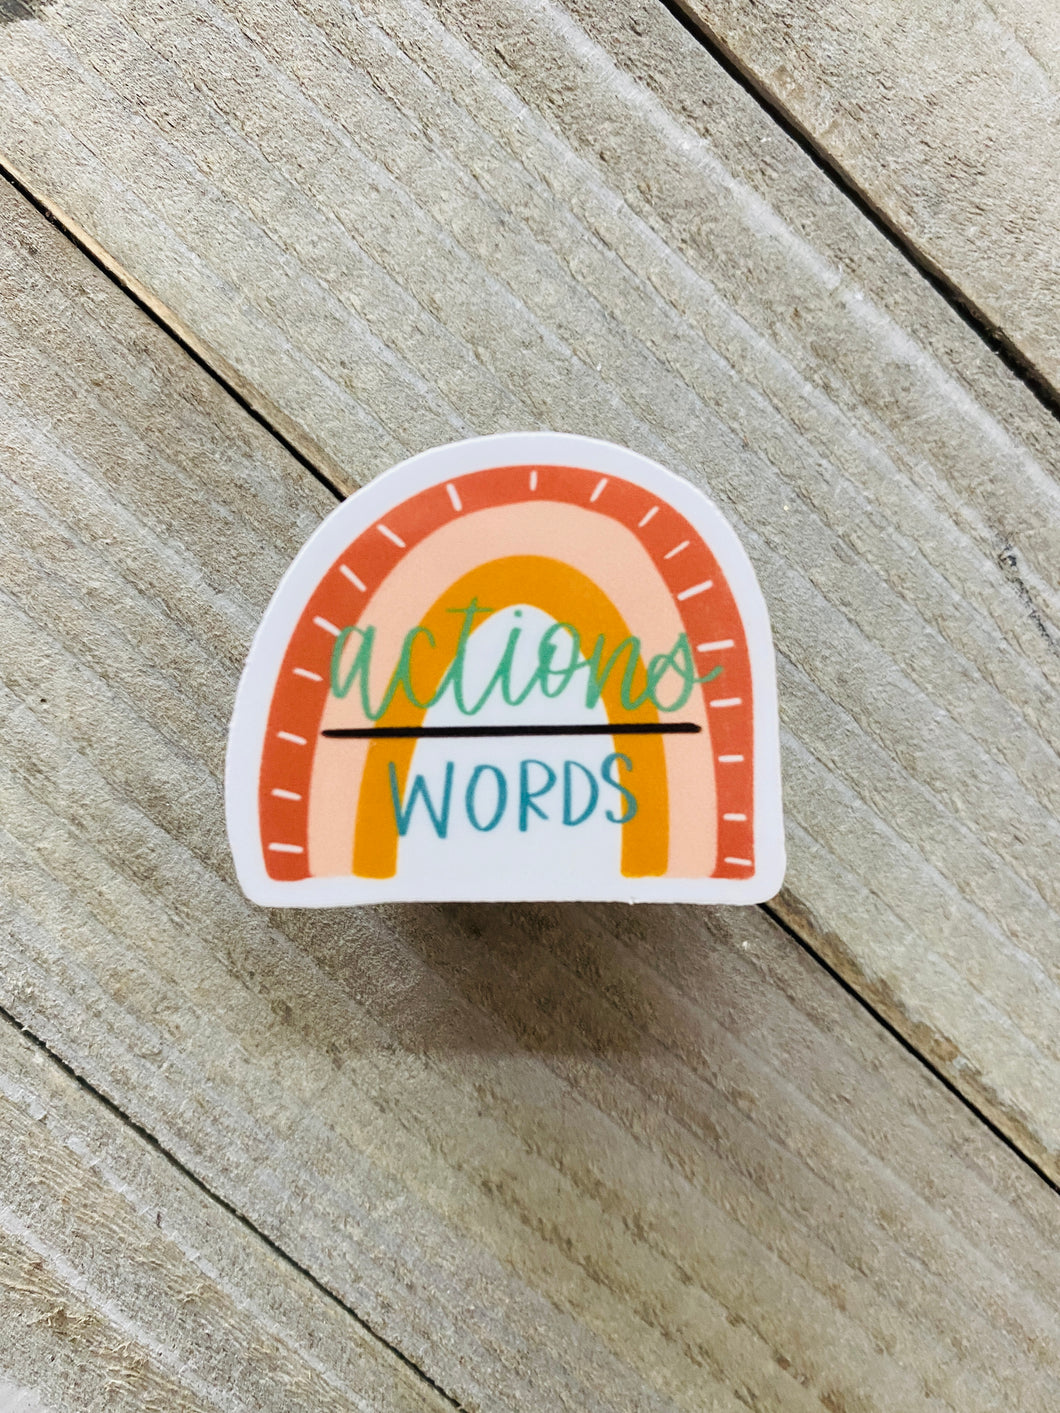 Actions over words - Sticker